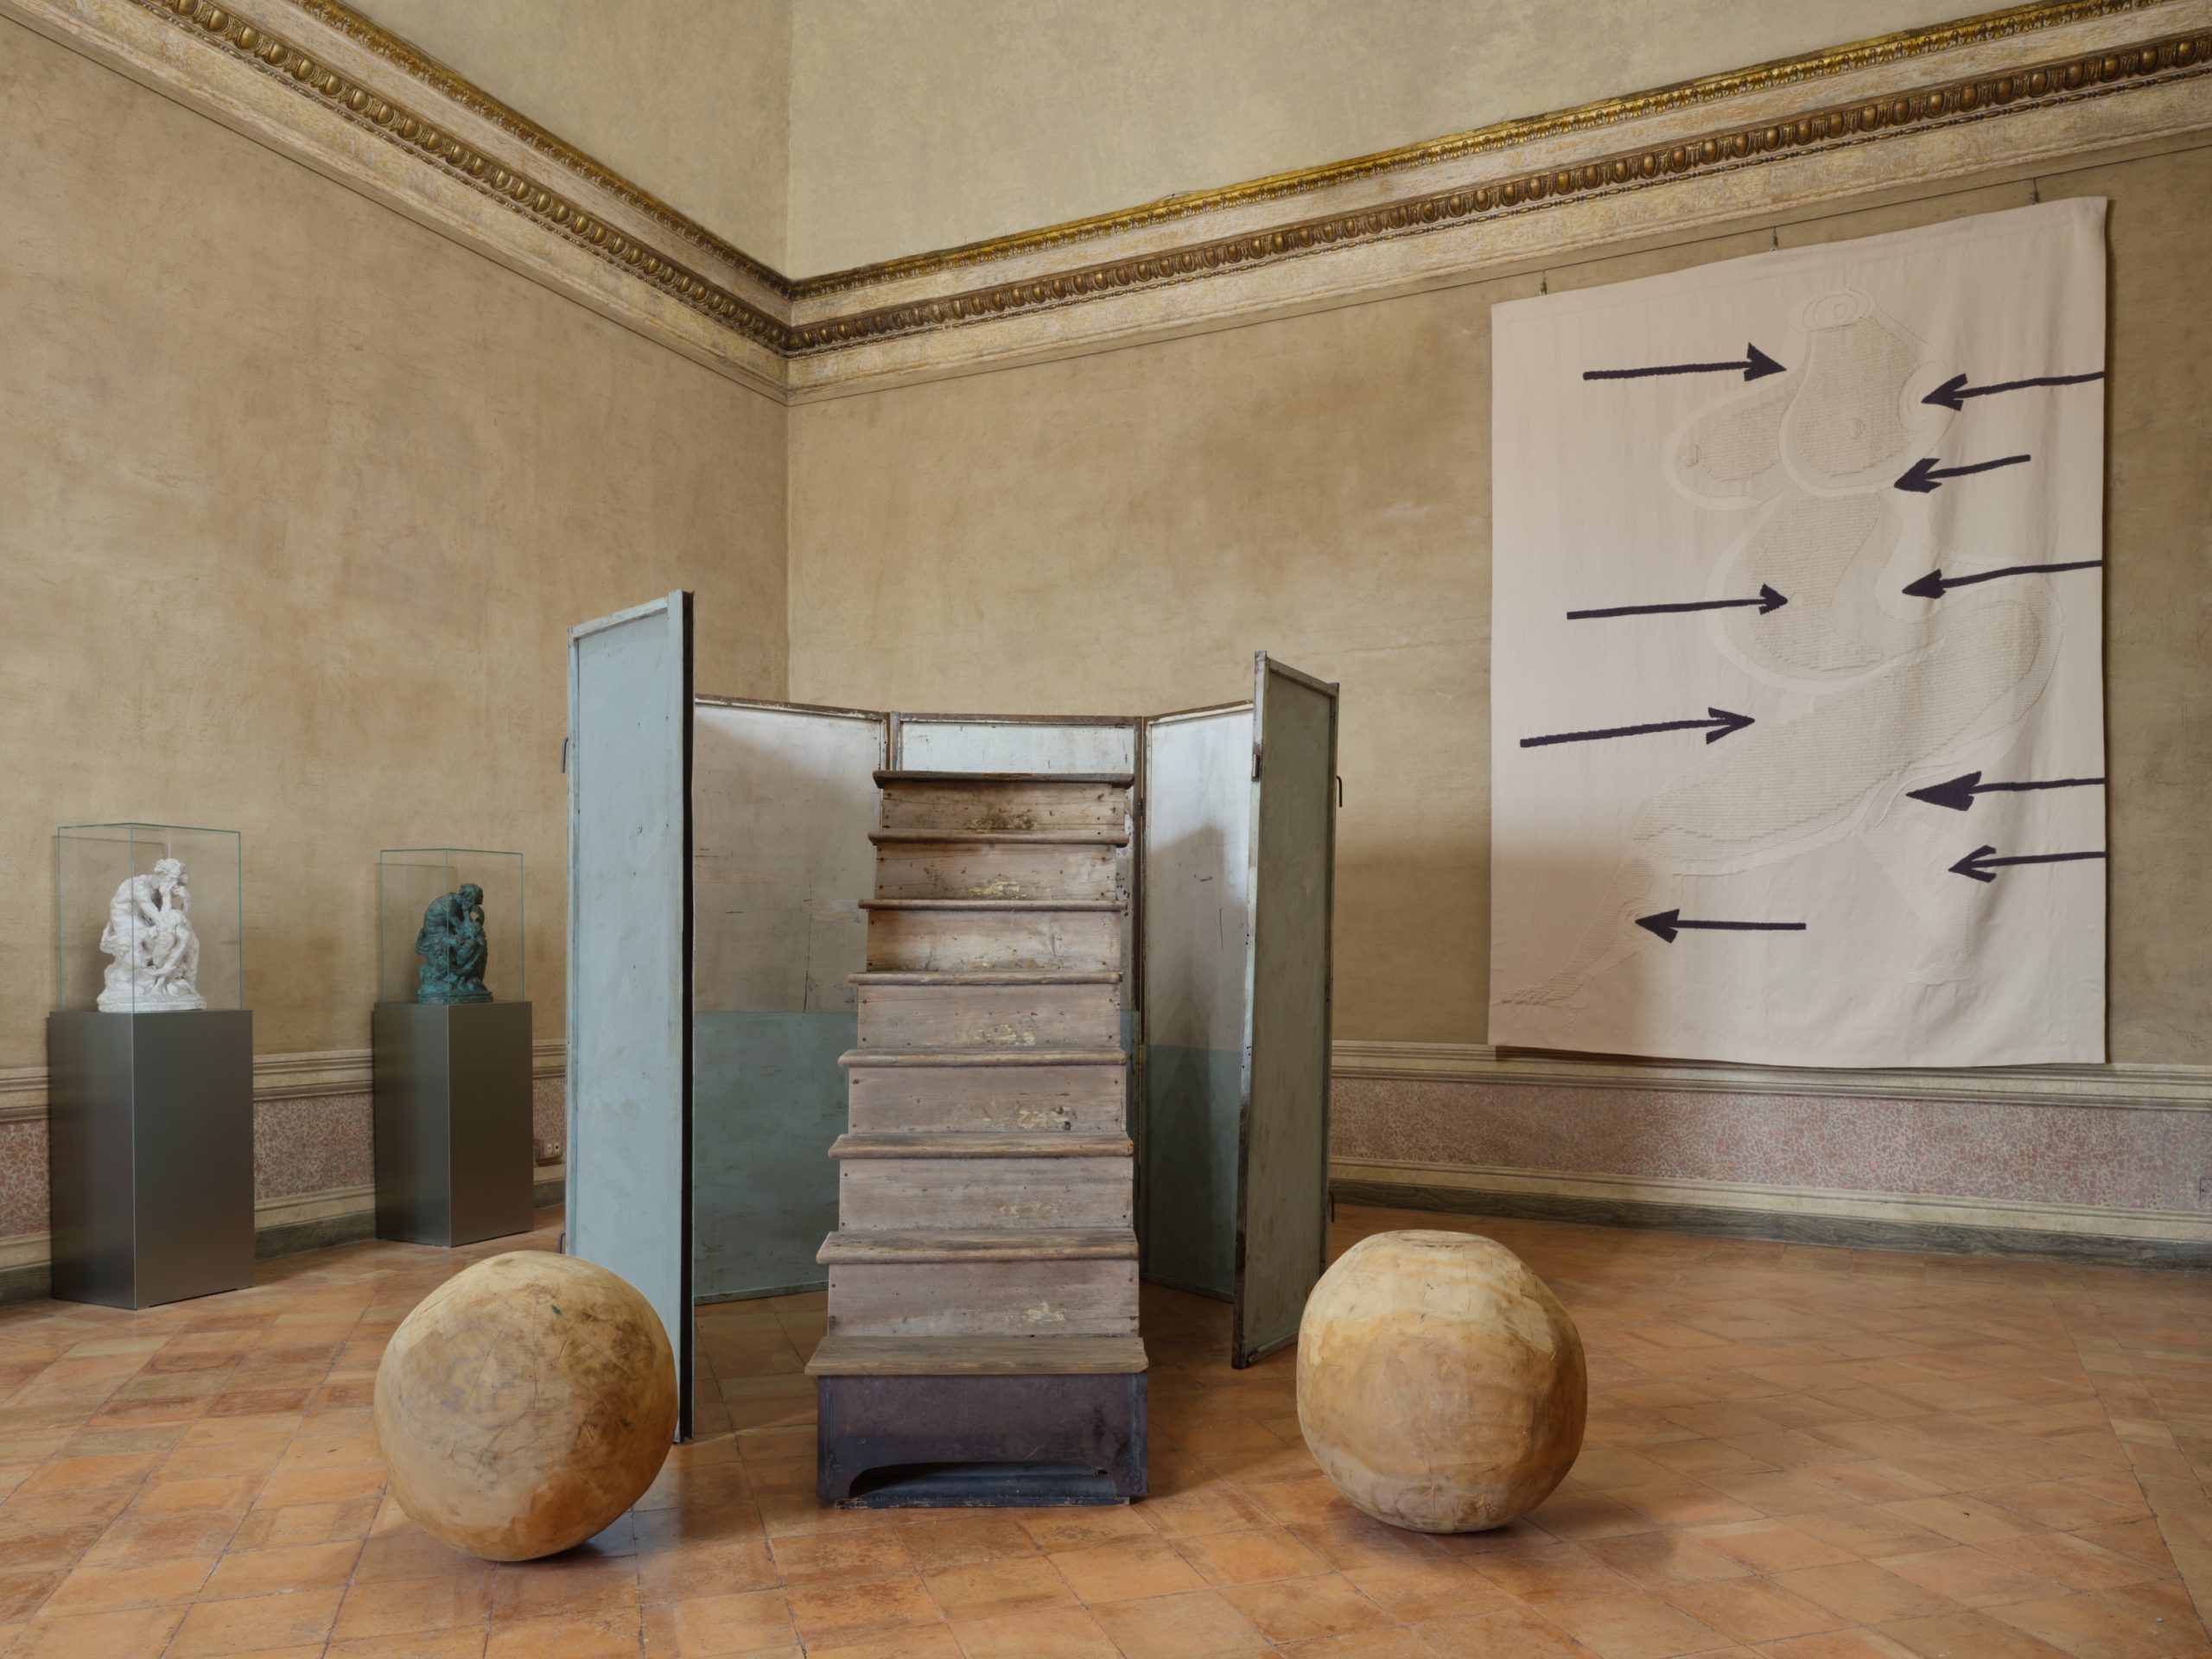 “Louise Bourgeois: Unconscious Memories,” A Provocative Dialogue with Classical Art Opens at Galleria Borghese